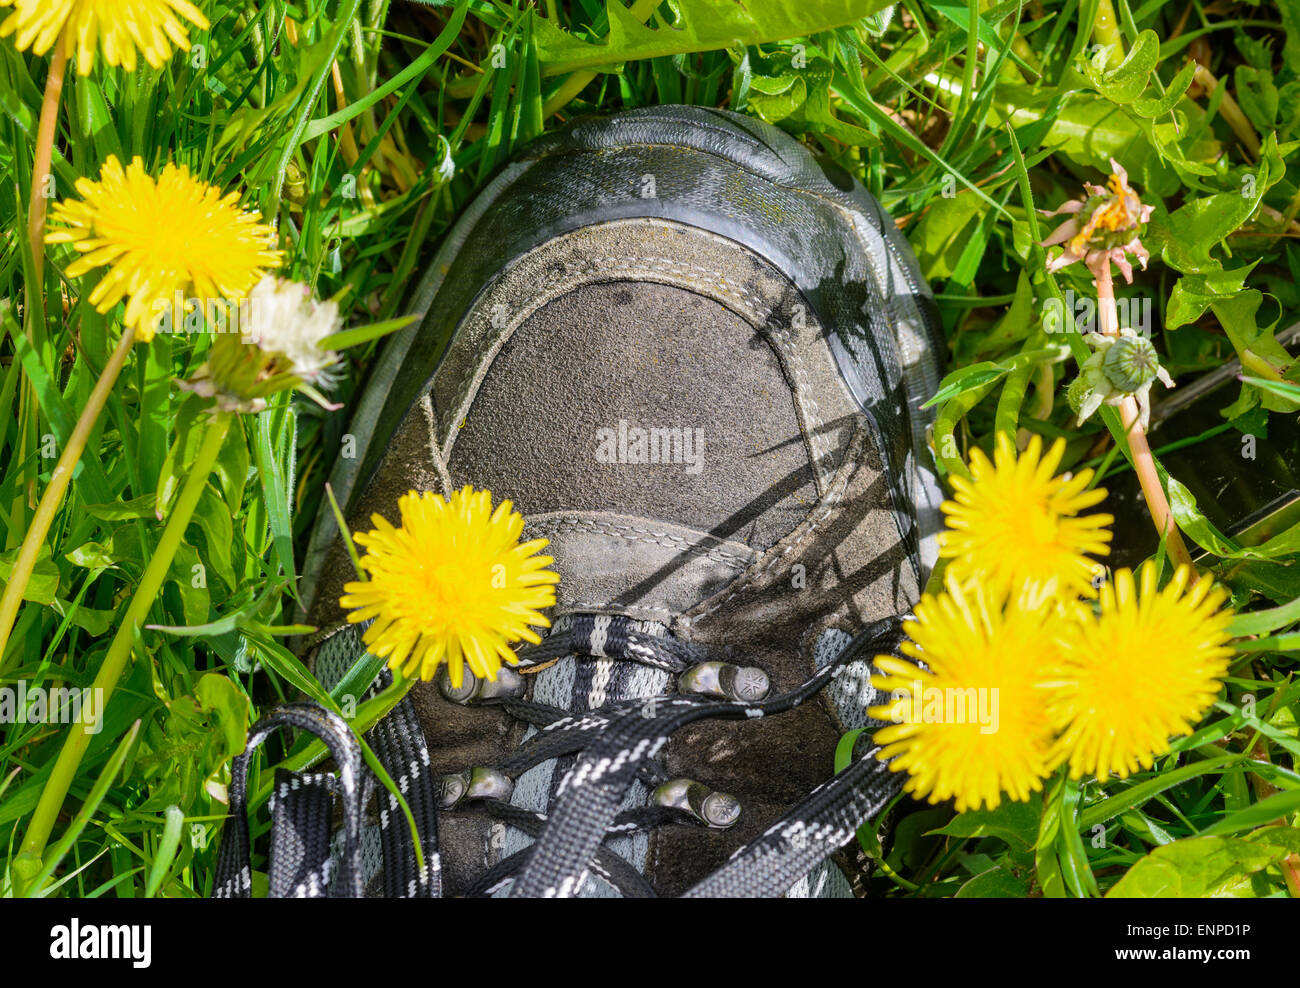 Trampled on. Flowers being stepped on by someone wearing trainers. Stock Photo